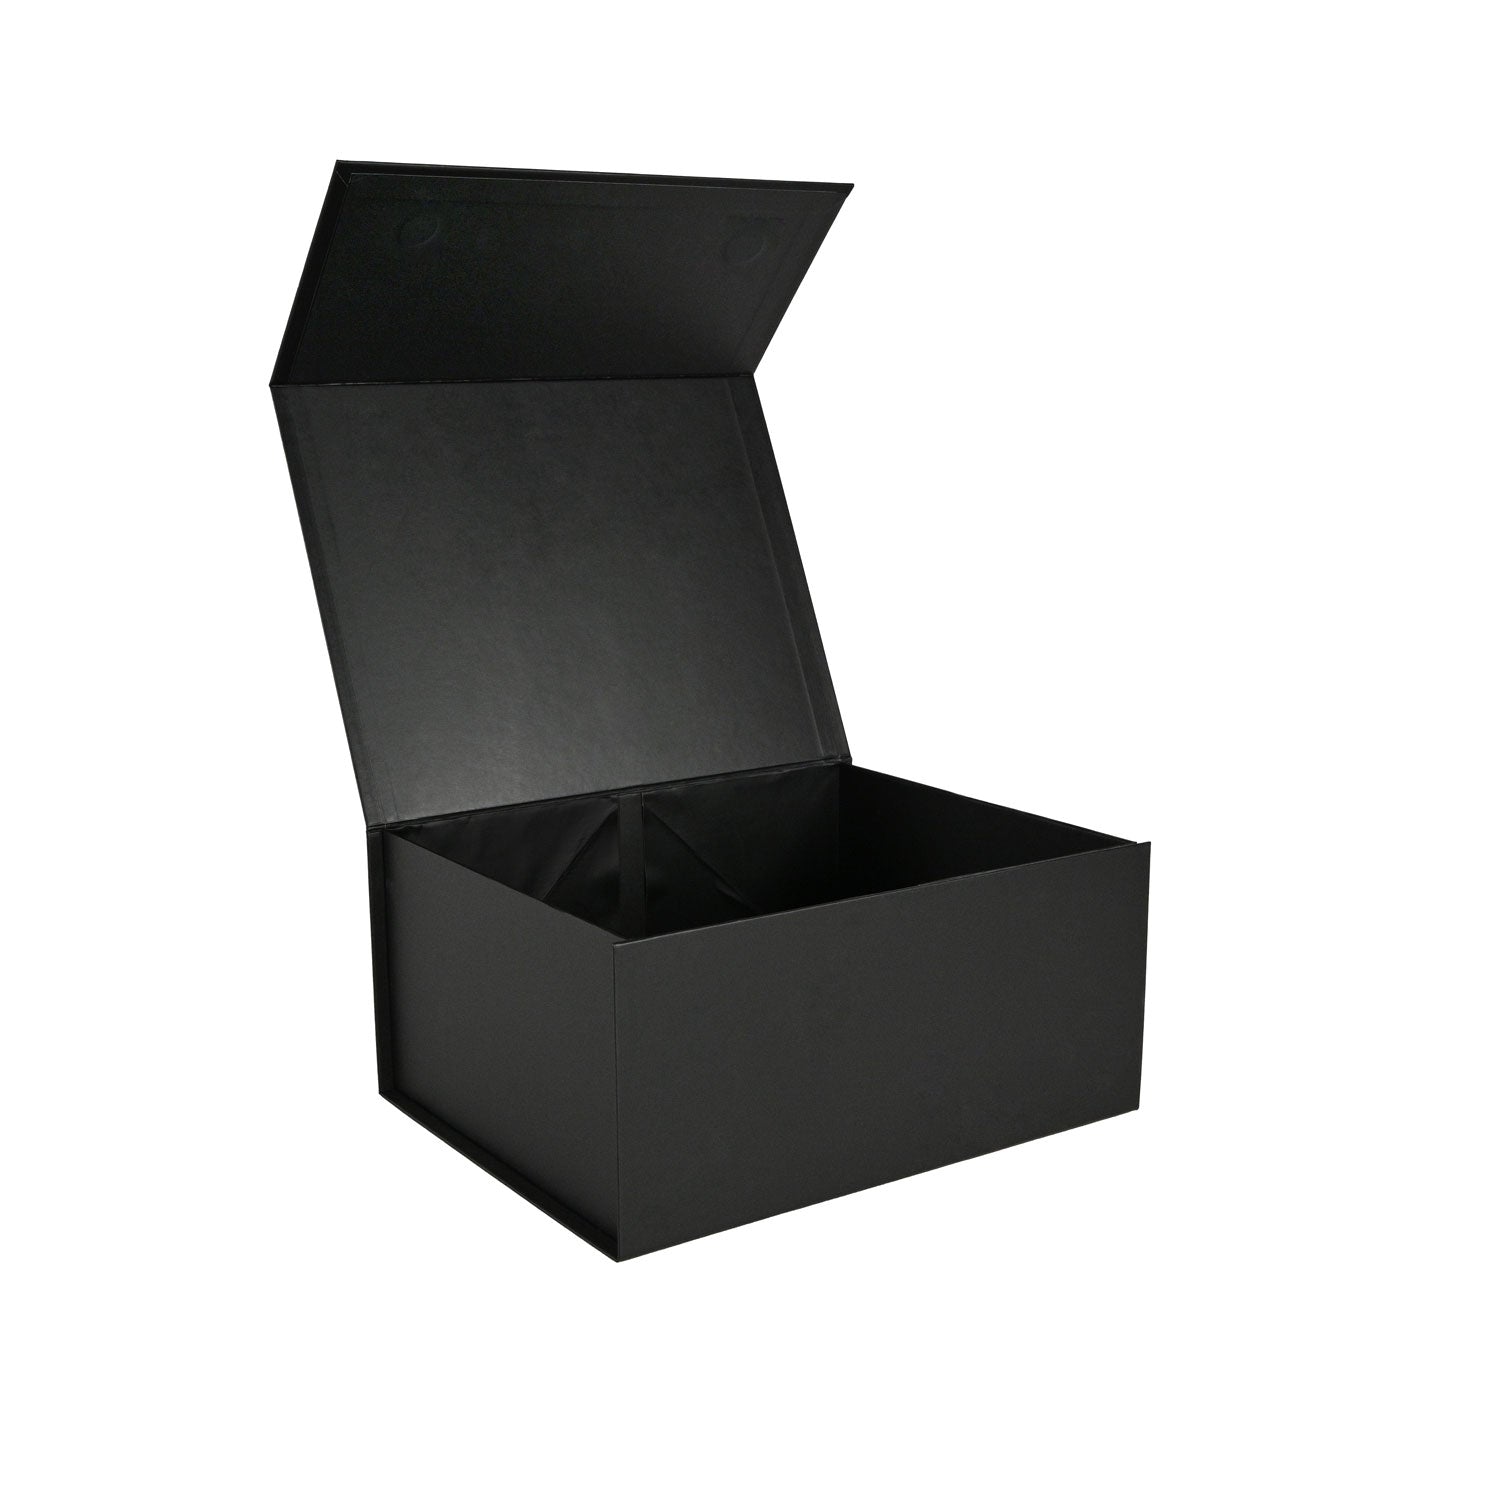 Quality empty magnetic black Medium gift box - NEON Packaging